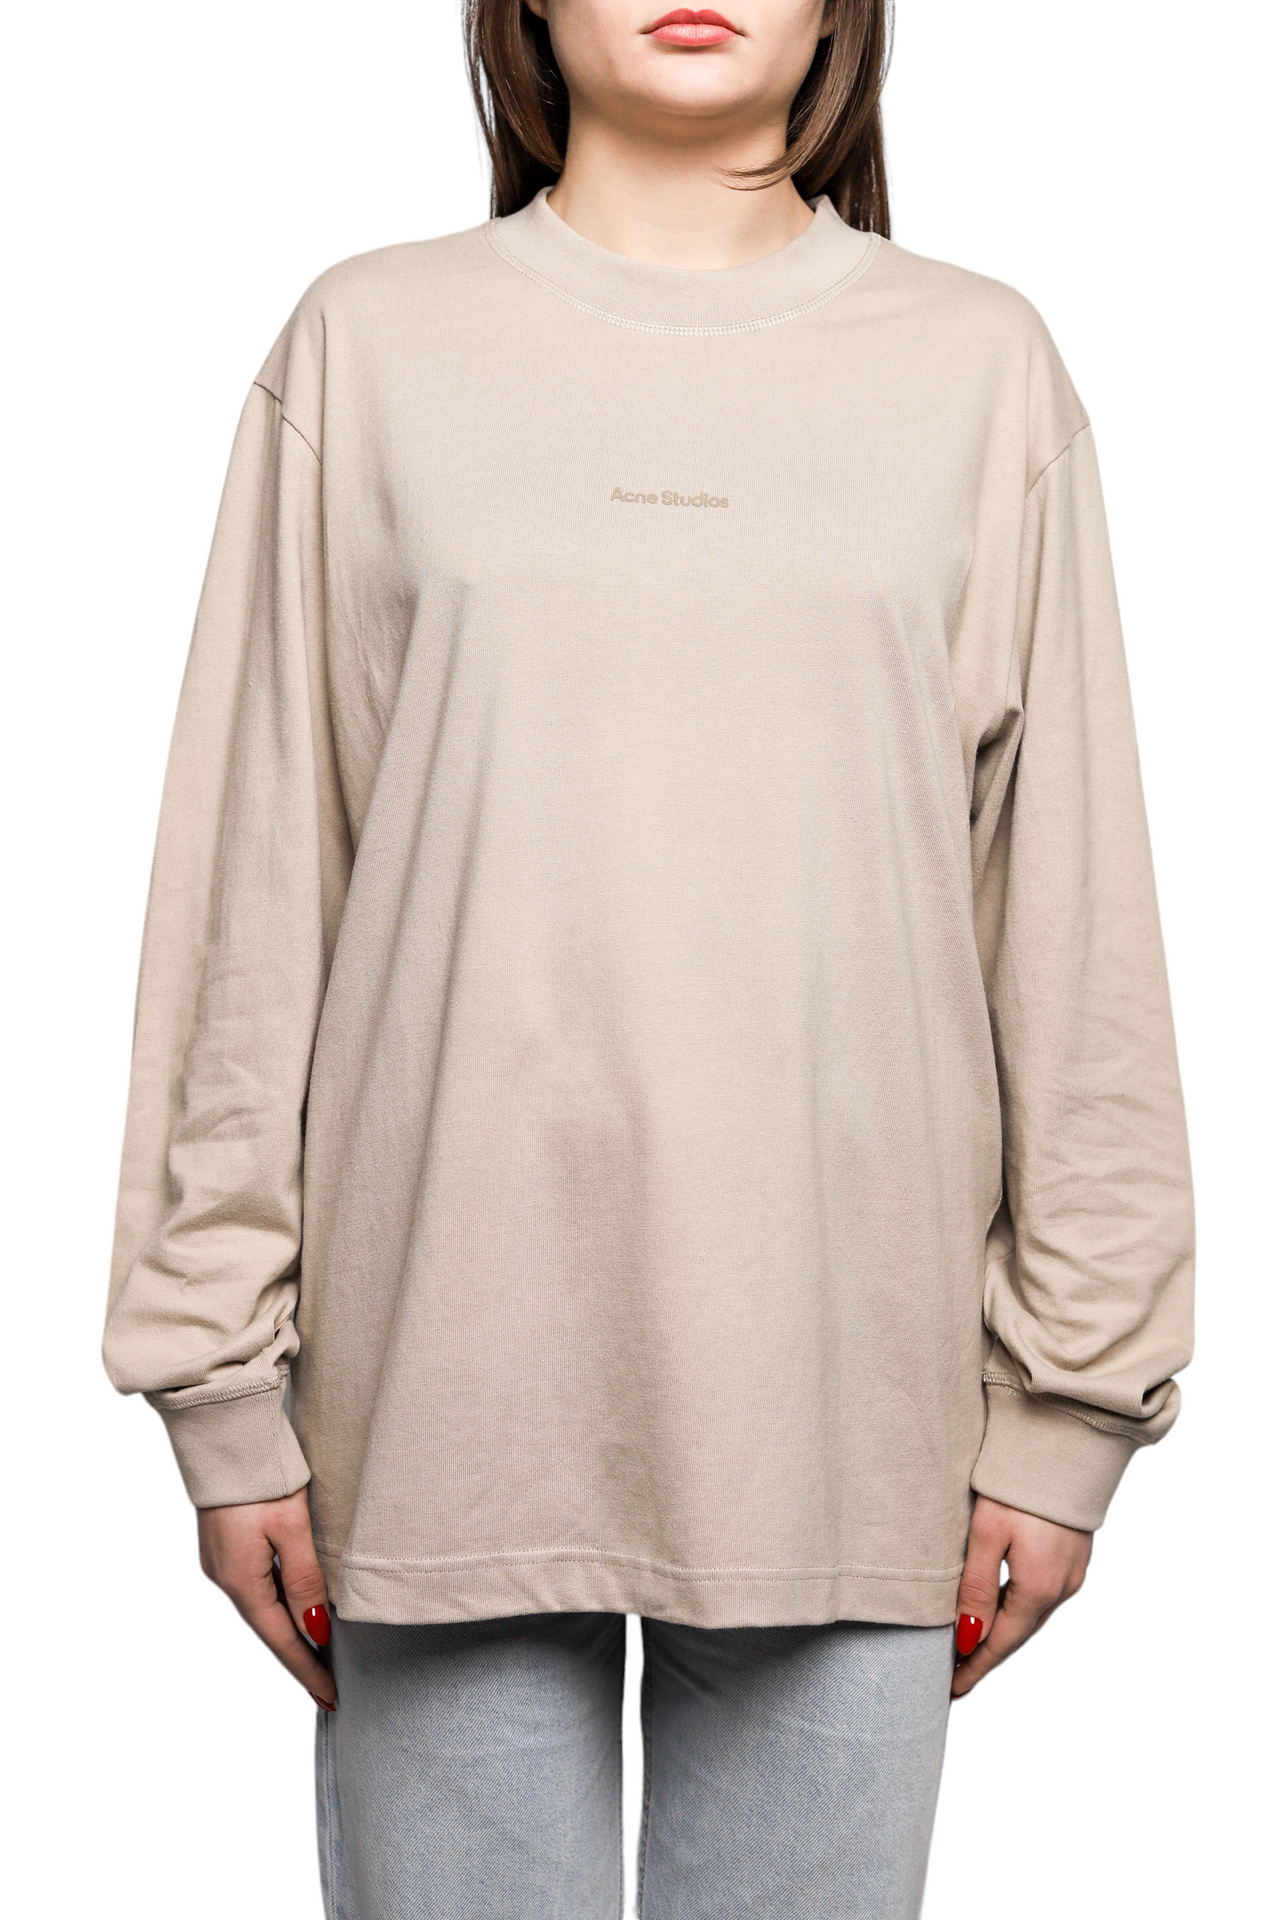 Acne Studios Erwin Long Sleeve Stamp Tee Oyster